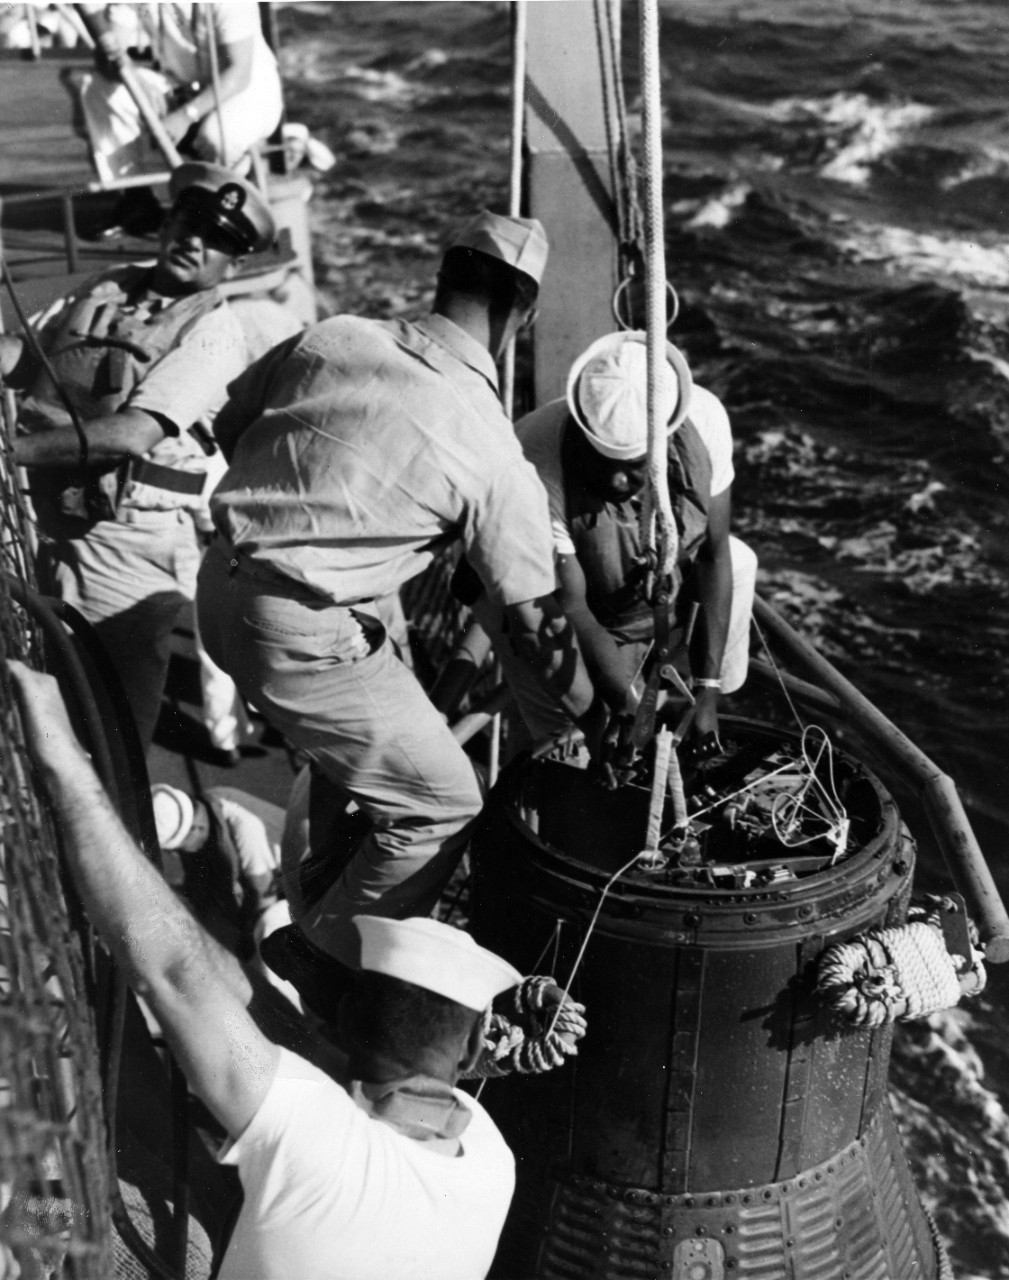 Cape Canaveral, FL - naval personnel of USS Noa (DD-841) hook on recovery equipment as astronaut John G. Glenn's NASA Friendship 7 spaceship is recovered after world orbital flight. February 20, 1962. 